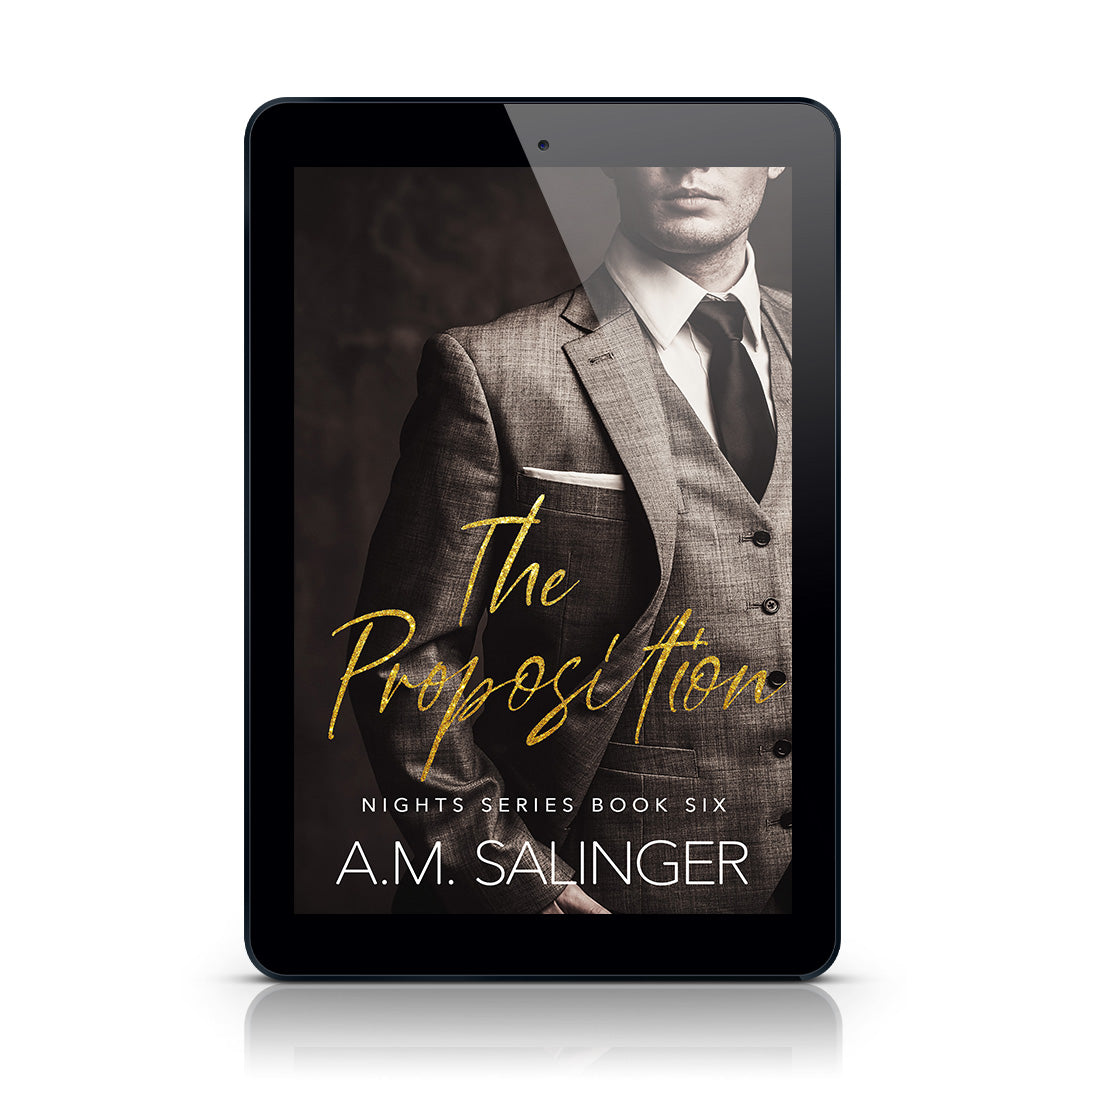 The Proposition (Nights Series 6) EBOOK contemporary mm romance author am salinger